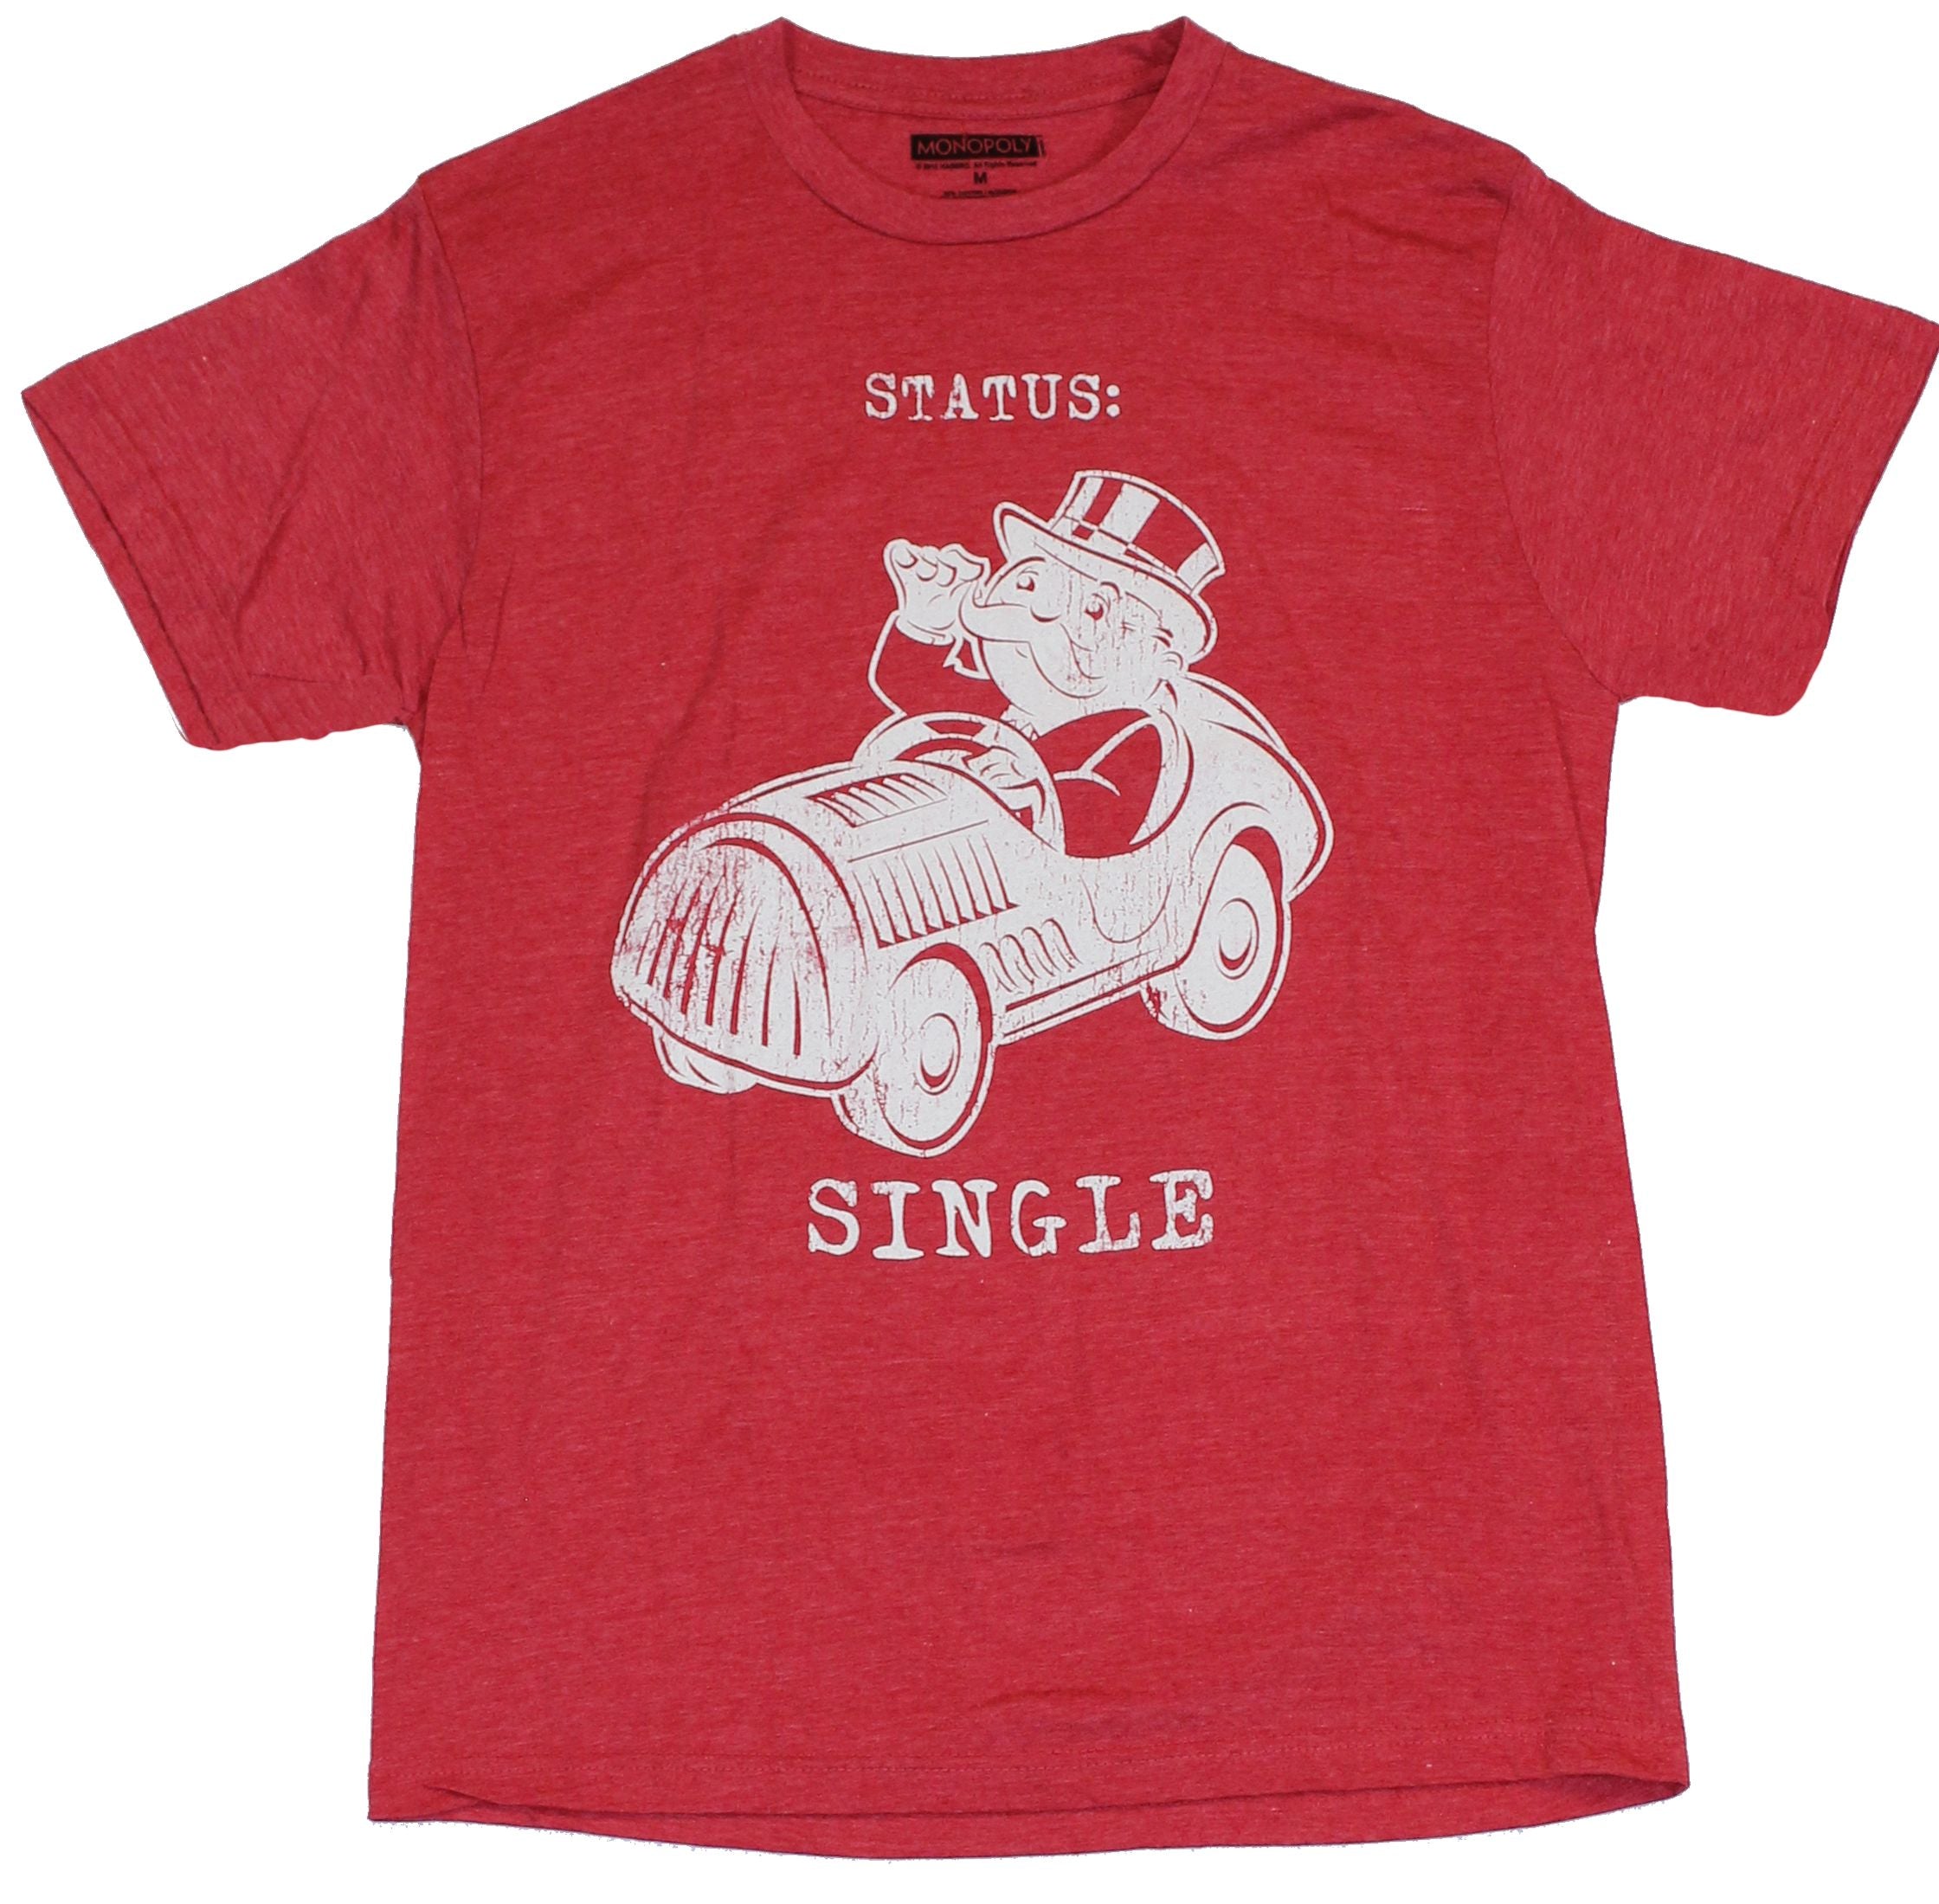 Monopoly Mens T-Shirt - "Status Single" Distressed Pennybags in Car Image